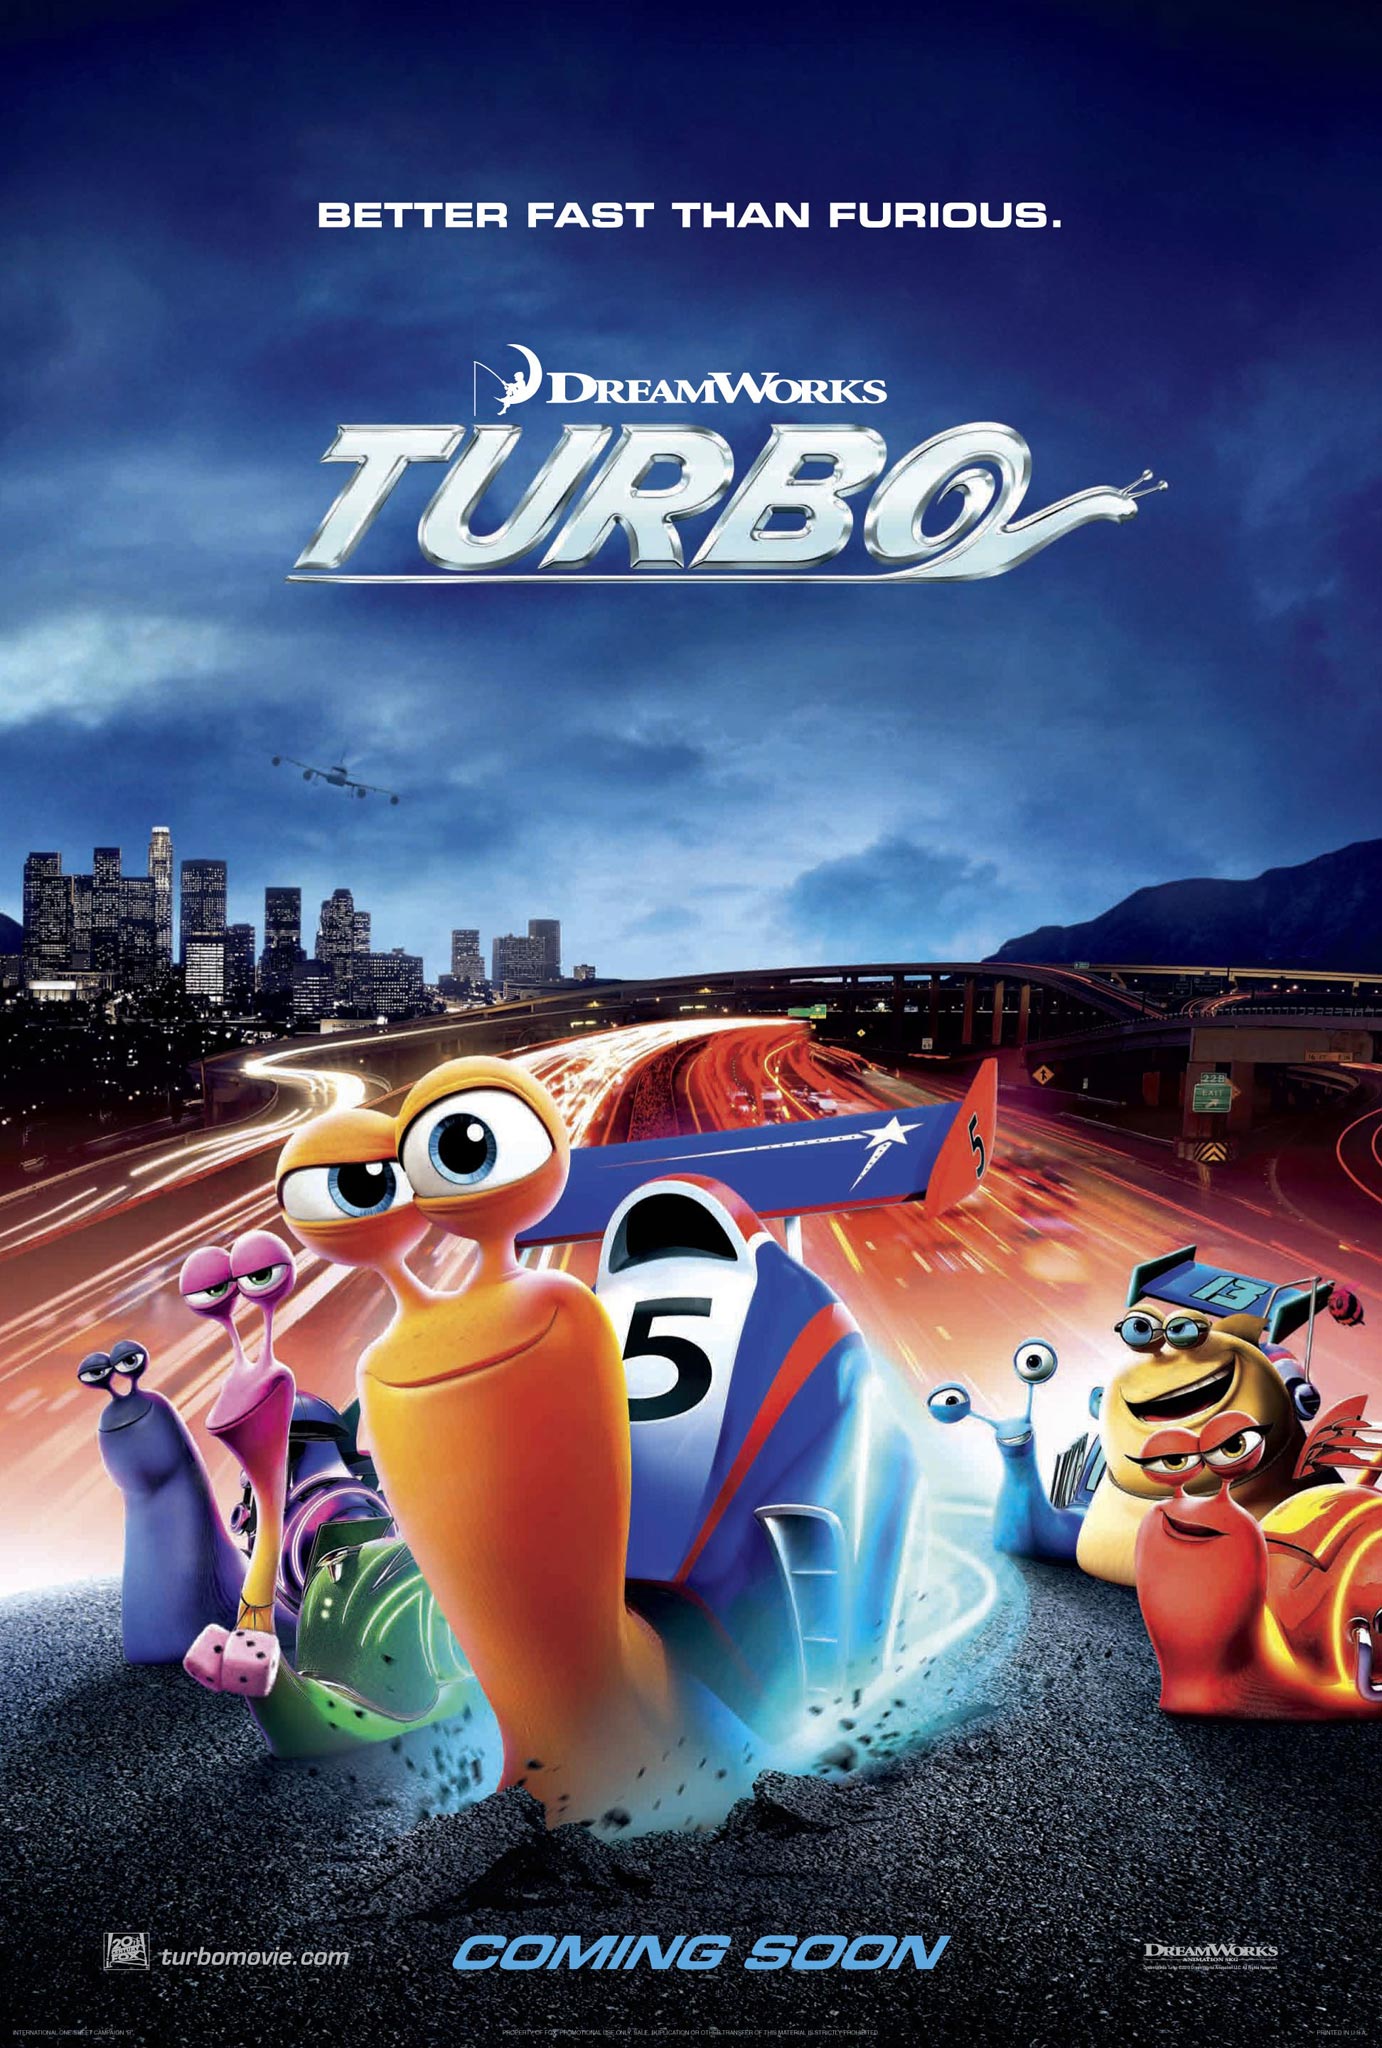 where can i play turbo 21 online